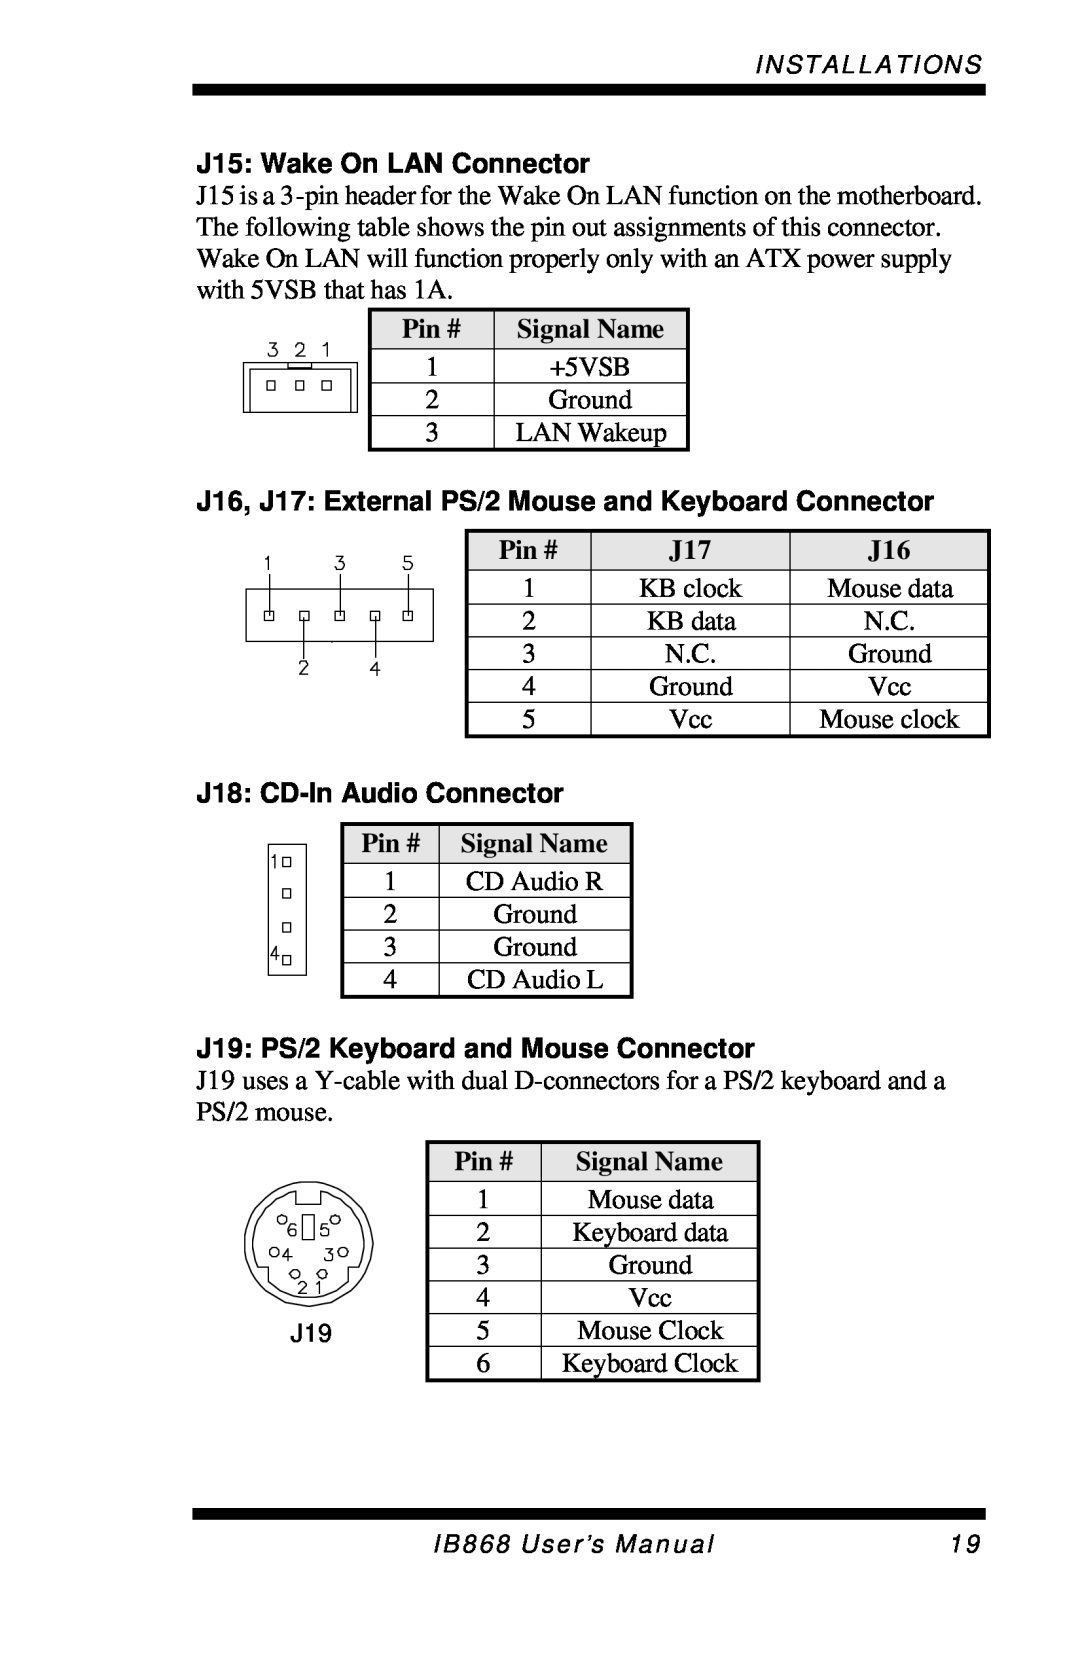 Intel IB868 user manual J15: Wake On LAN Connector, J18: CD-InAudio Connector, J19: PS/2 Keyboard and Mouse Connector 